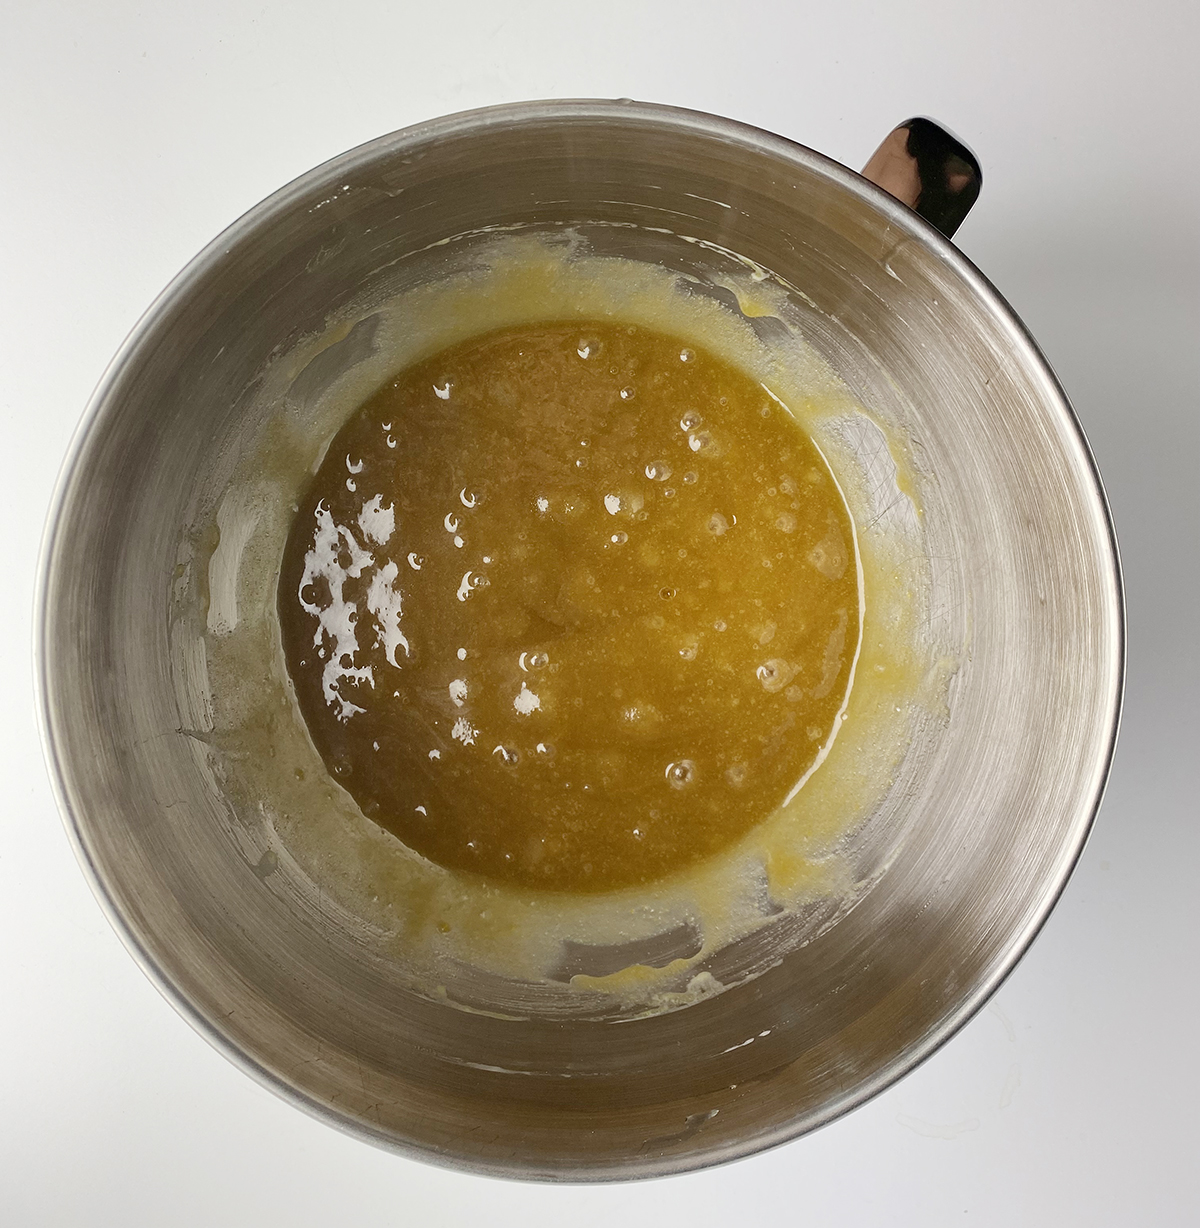 Sugar mixture for caramel apple cake in a bowl.